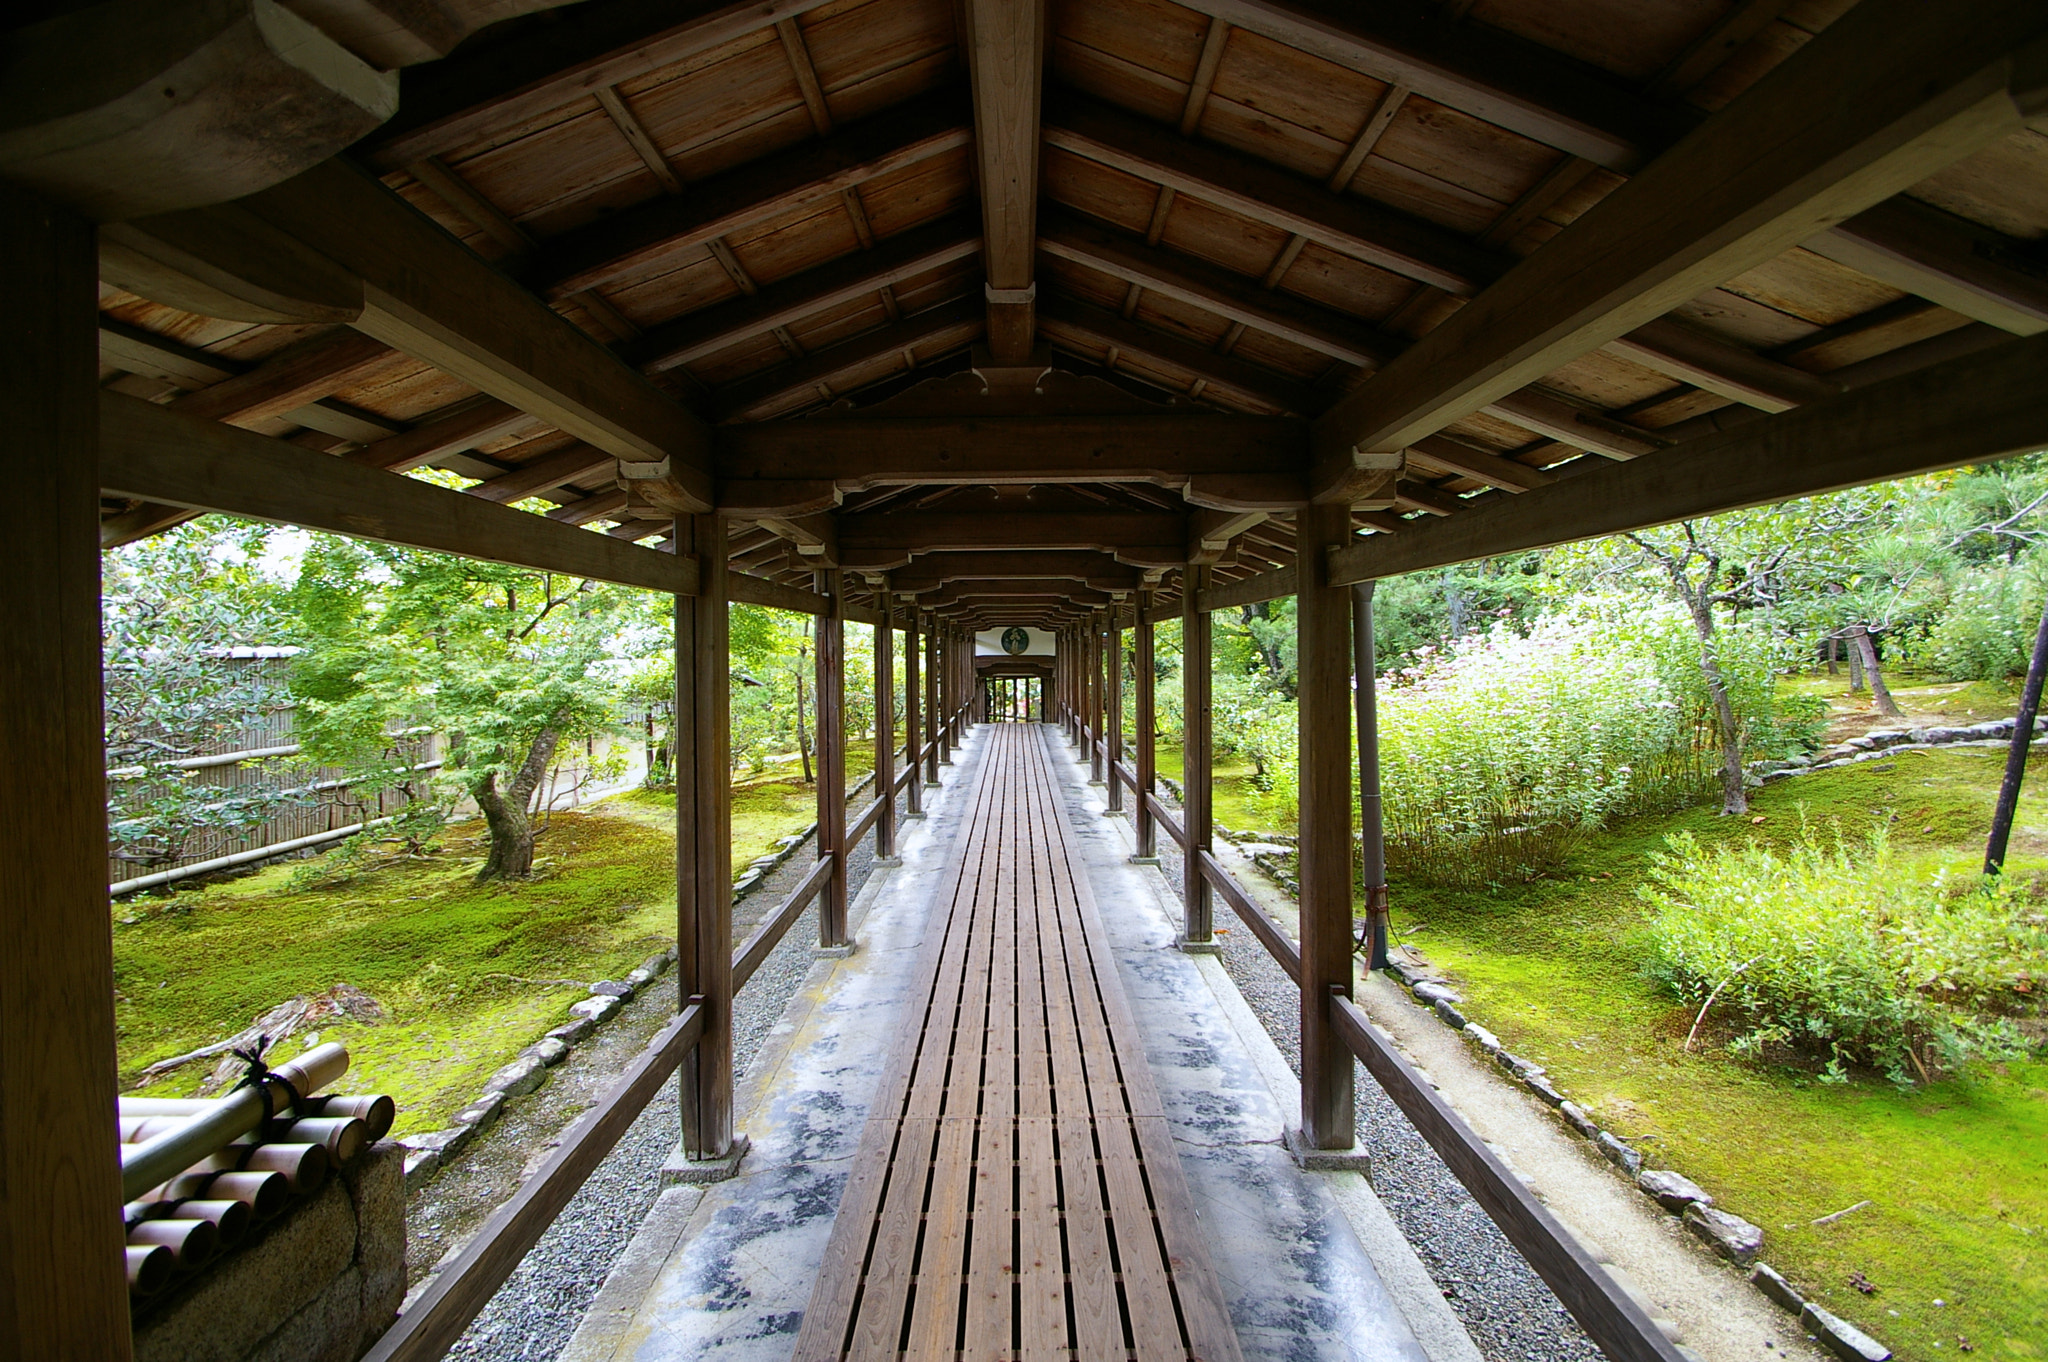 Tamron SP AF 10-24mm F3.5-4.5 Di II LD Aspherical (IF) sample photo. Covered bridge in kyoto japan photography